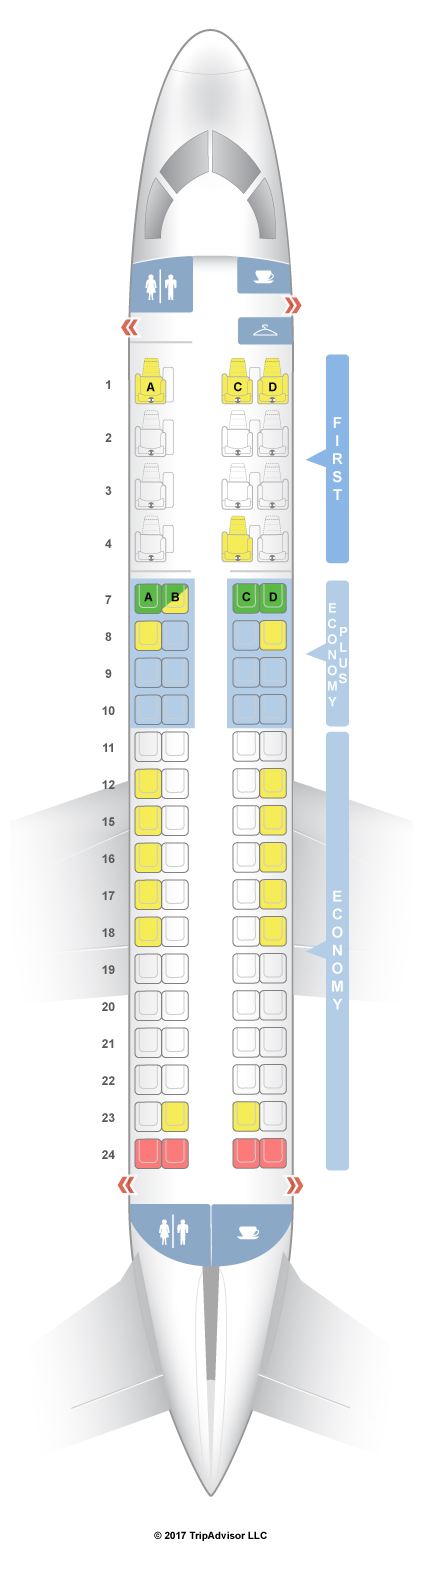 united airlines seating chart embraer 175